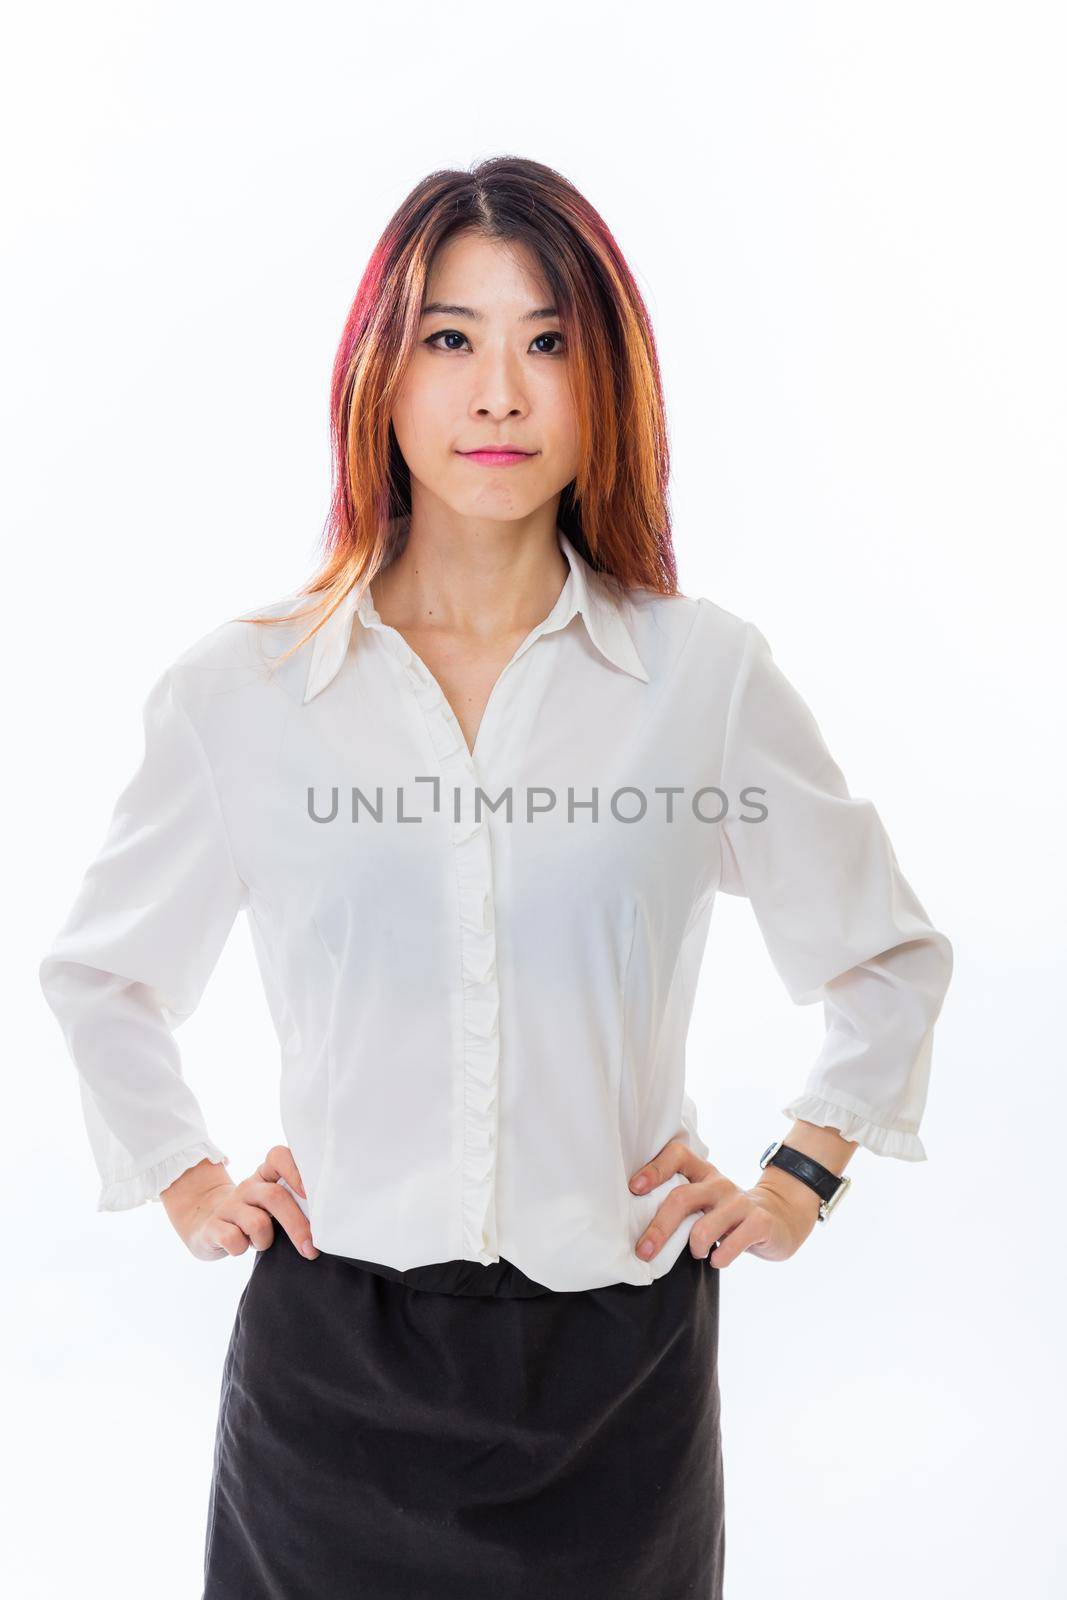 Asian Chinese businesswoman in casual business clothing